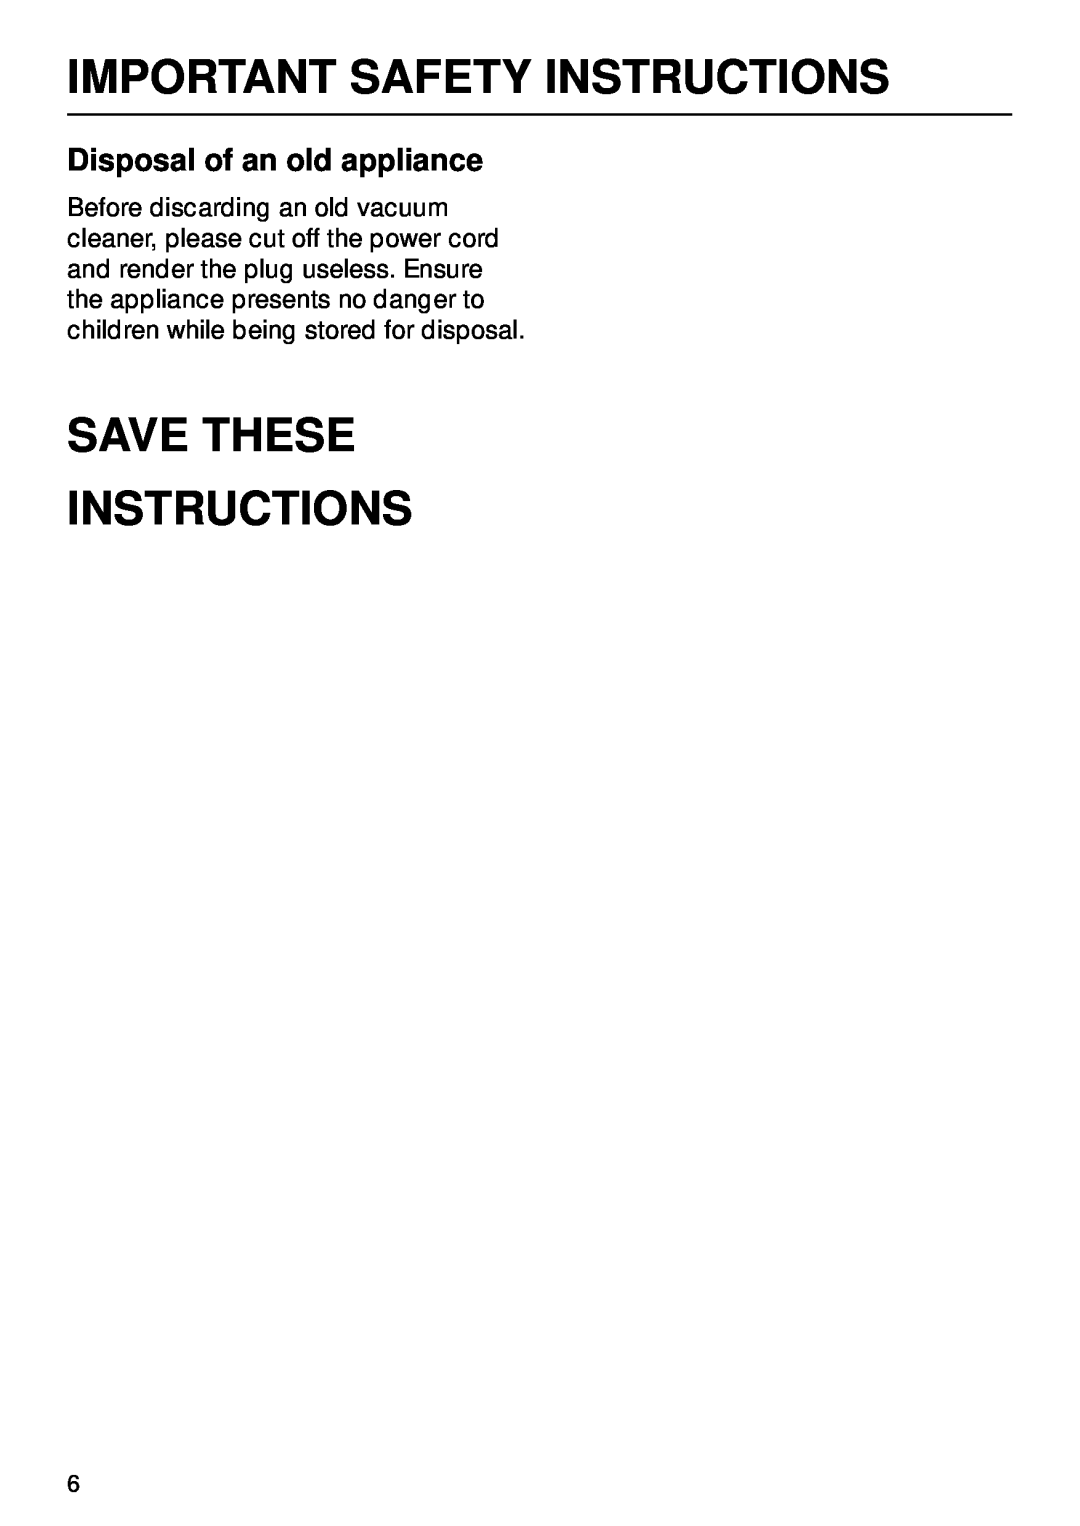 Miele S 252i, S 246i manual Save These Instructions, Disposal of an old appliance, Important Safety Instructions 